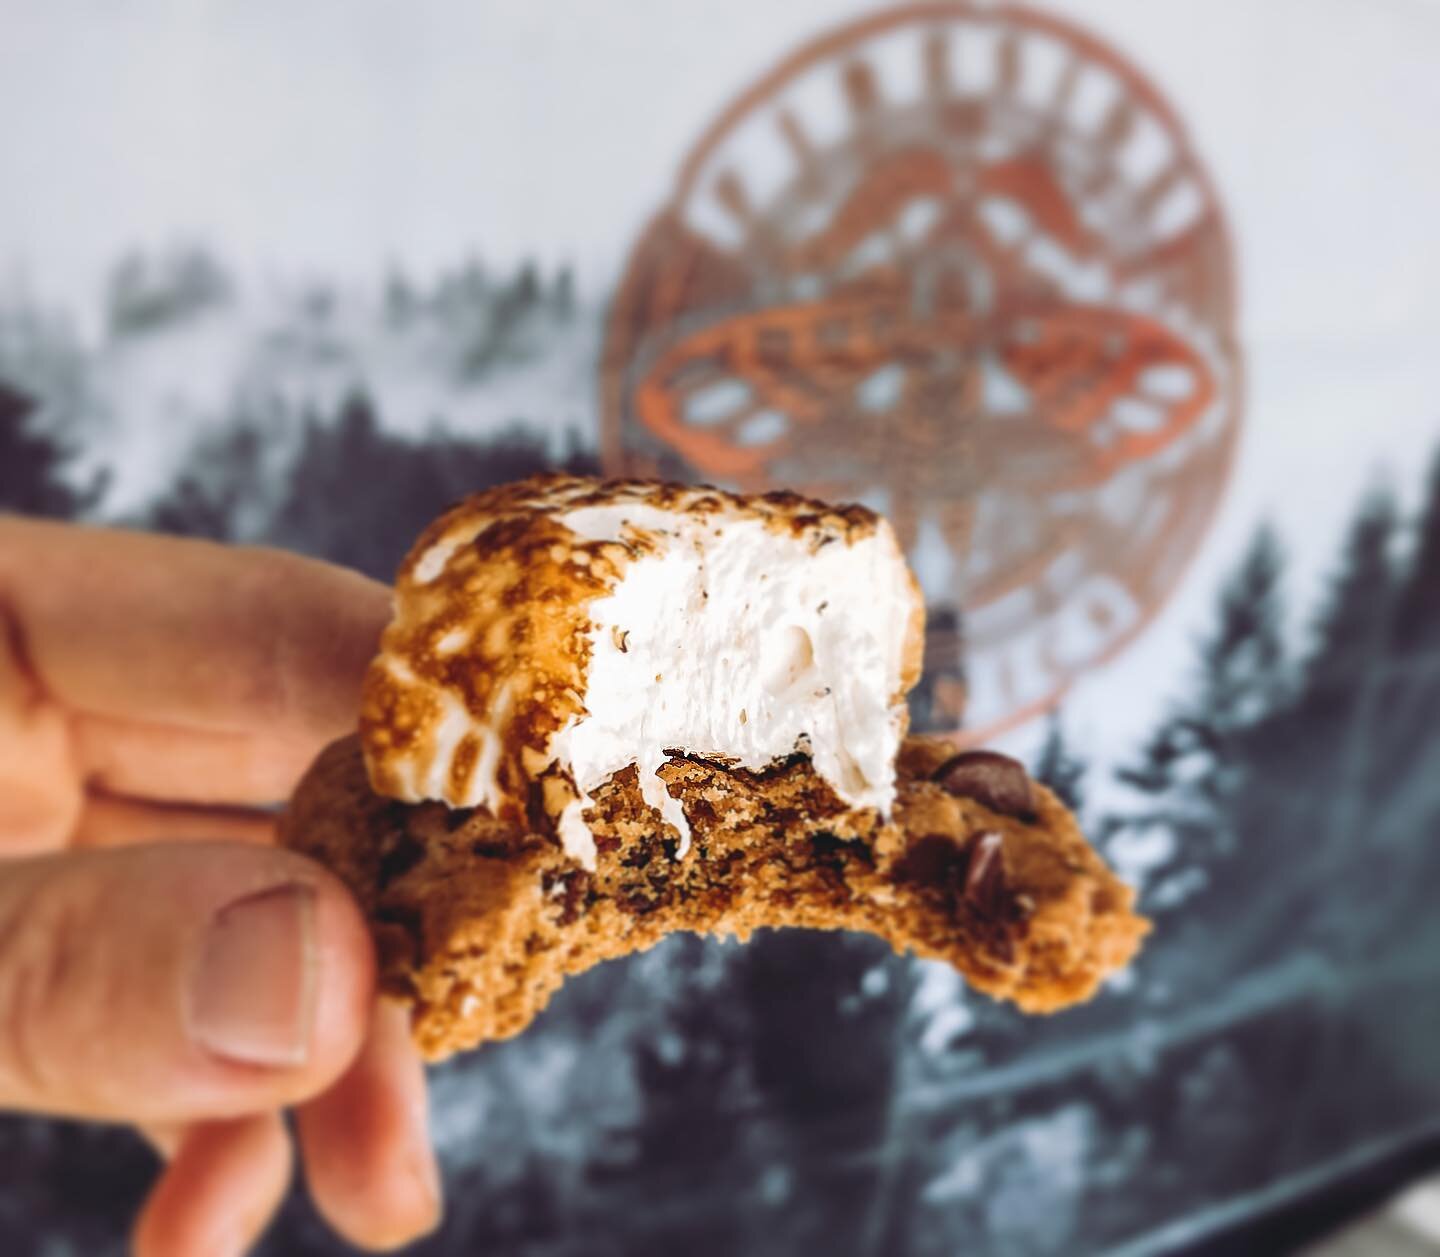 It&rsquo;s one of those mornings 😎
Our delicate vegan marshmallows, toasted atop a salted chocolate chip cookie 🤤
Brought to you by @mydandies and @thebreadunderground 
.
.
#sweet #cookiesforbreakfast #cookies #marshmallows #toasted #chocolate #smo